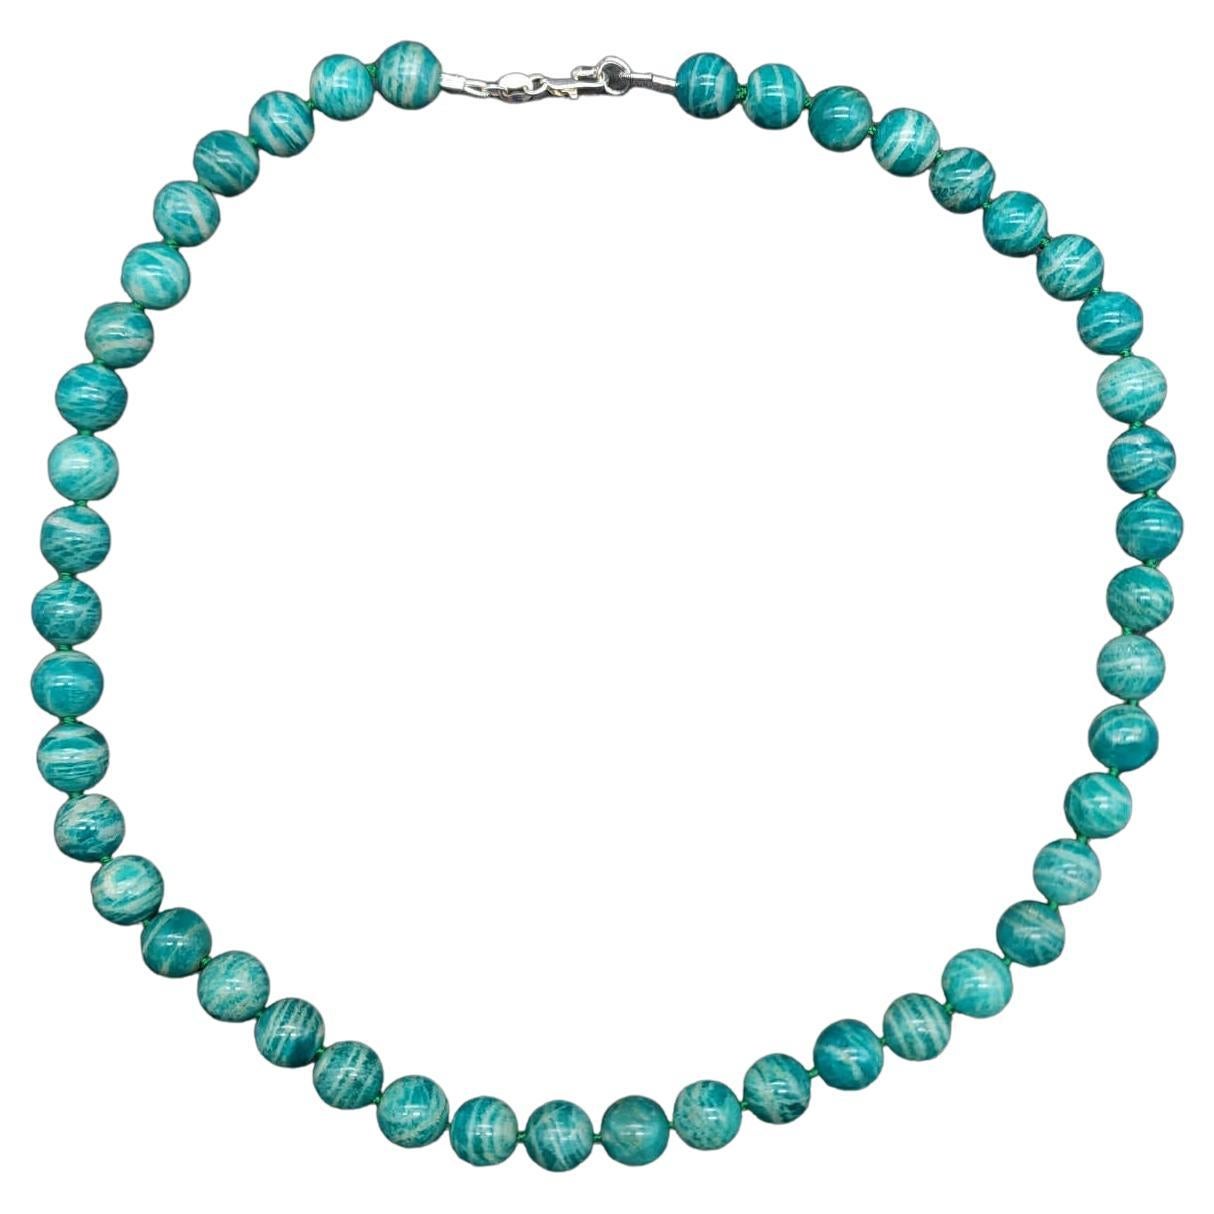 Green Russian Amazonite Bead Knotted Necklace w Sterling Silver Clasp, Vintage For Sale